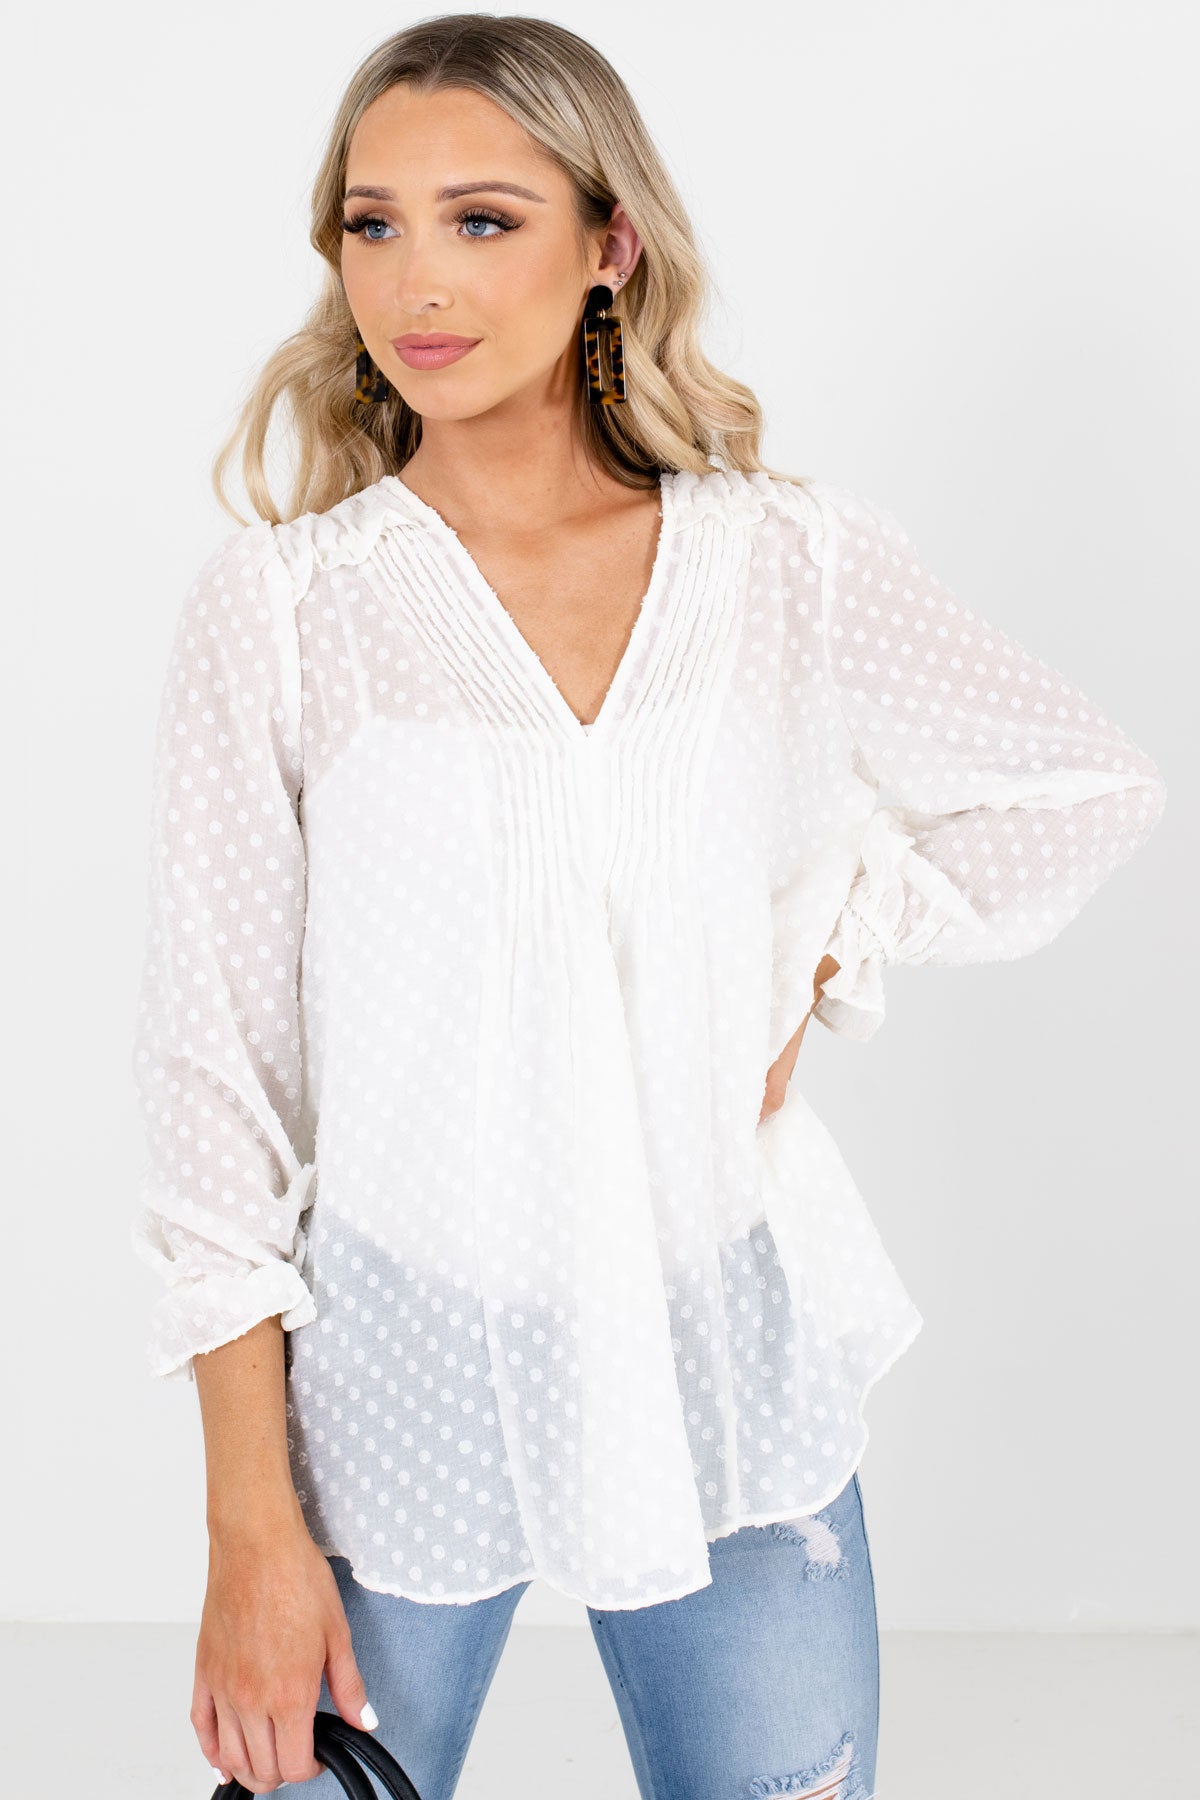 White Ruffled Cuff Boutique Blouses for Women